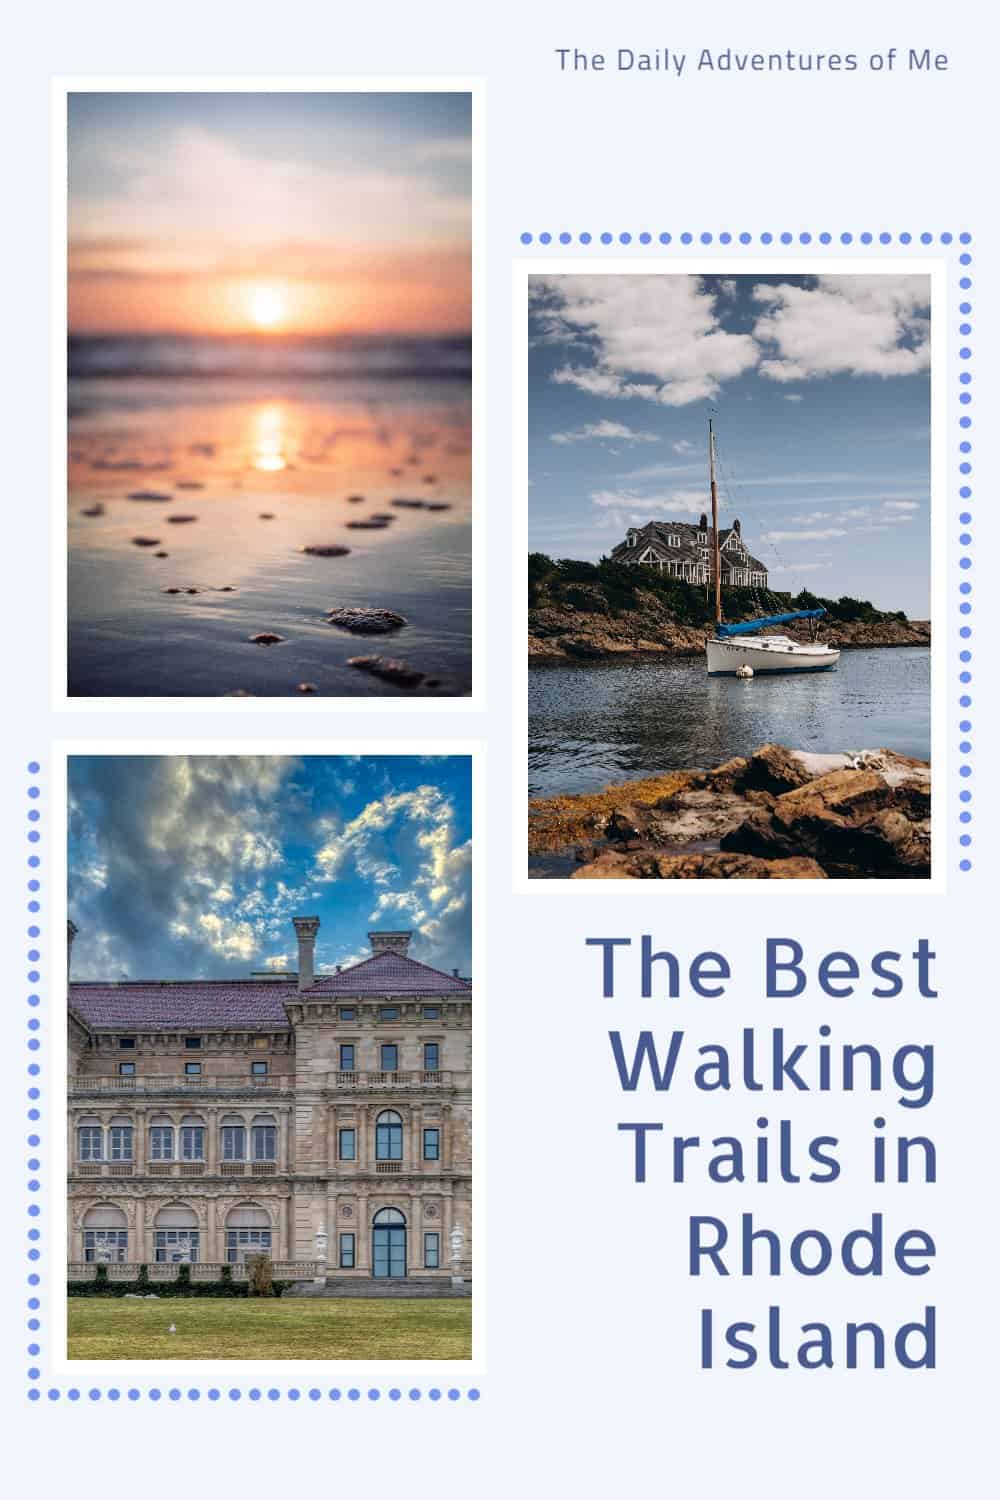 From city walks, to nature walks to mansions on the ocean, you can find a walk in Rhode Island for any taste. #thingstodoinRhodeIsland